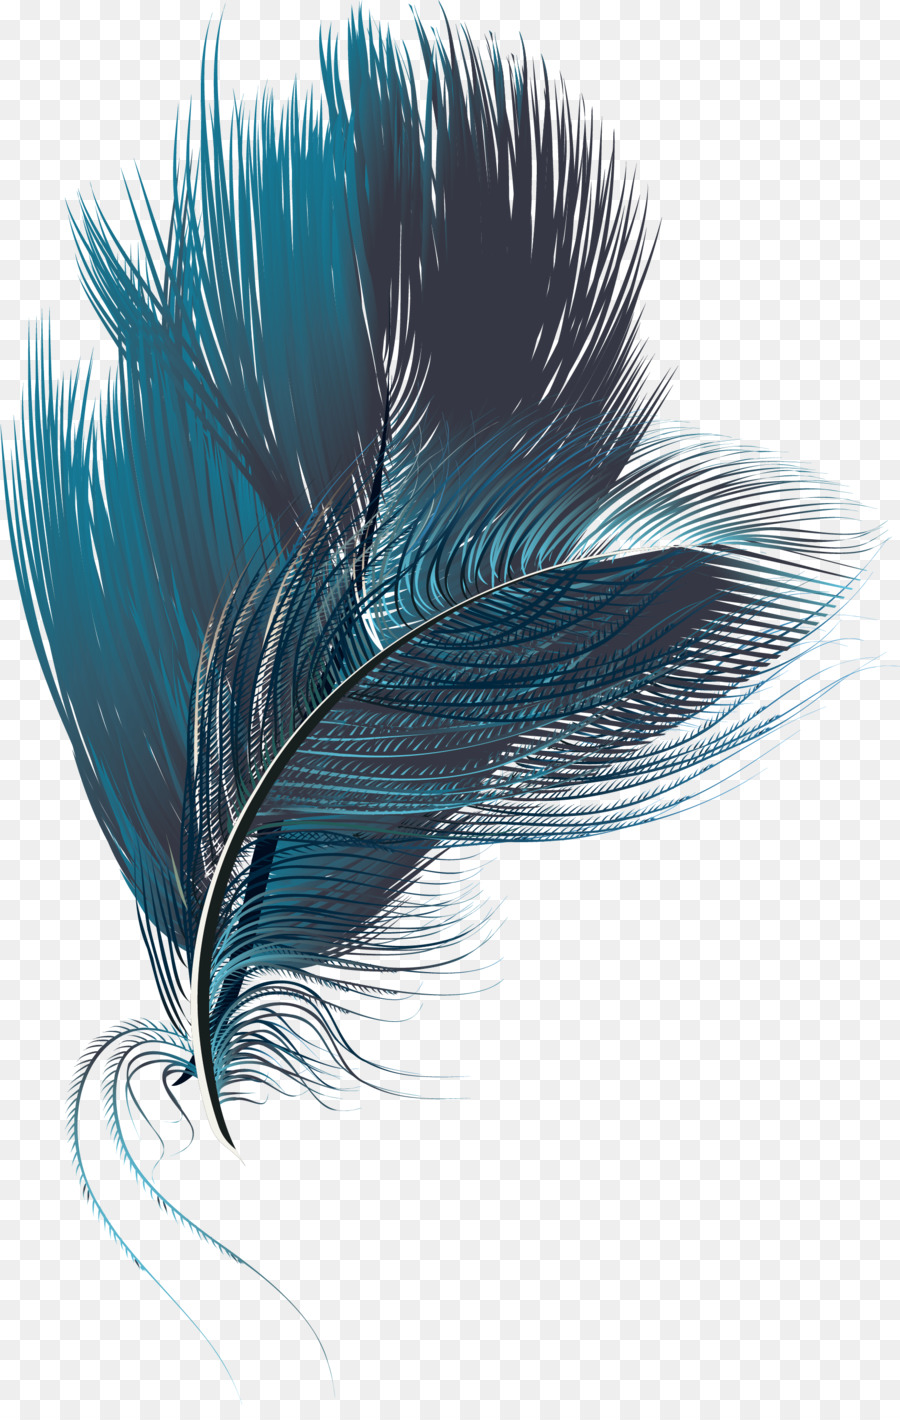 Feather Computer file - Blue exquisite feathers png download - 1717*2681 - Free Transparent Feather png Download.